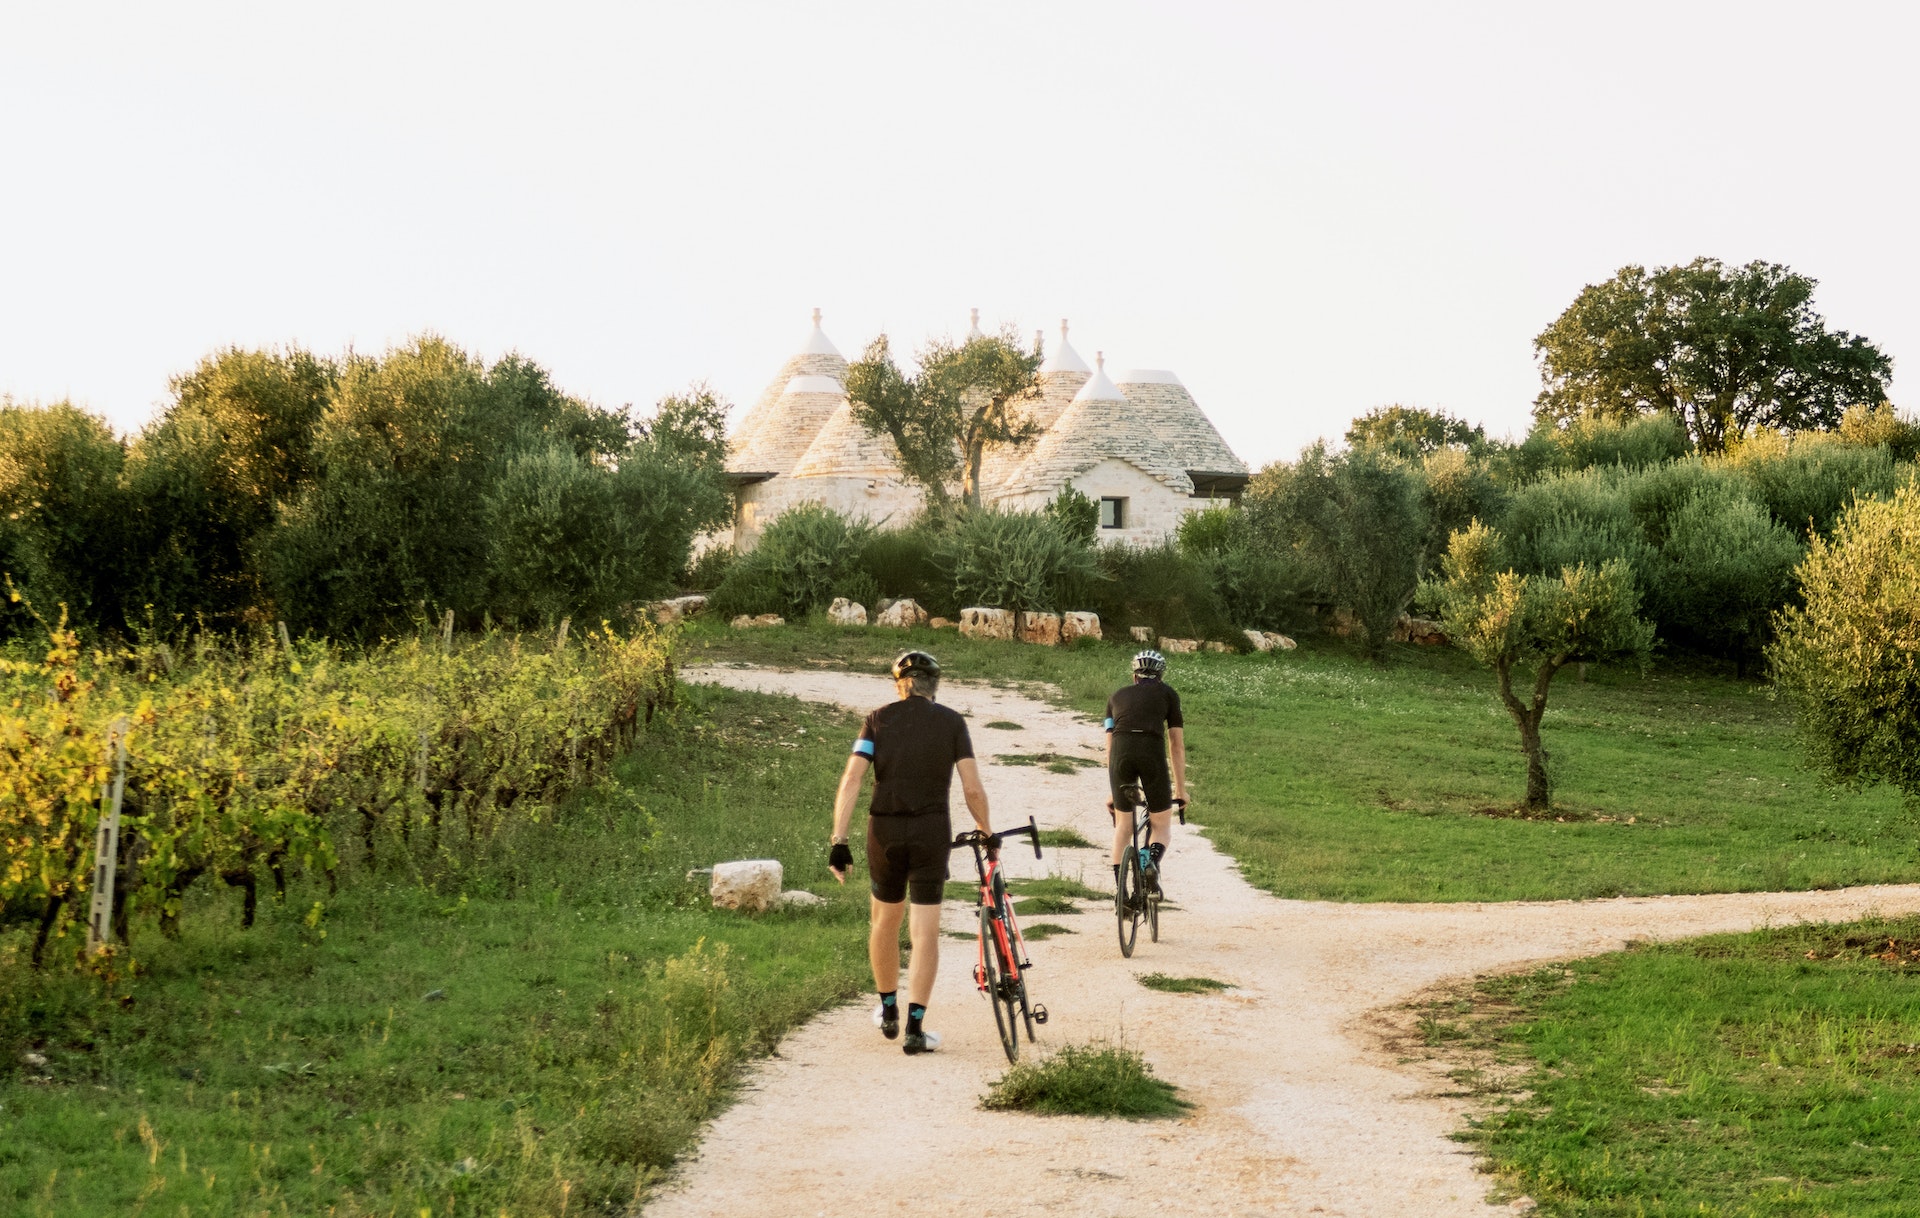 Two cyclists walk their bikes down a path towards some conical white limestone buildings